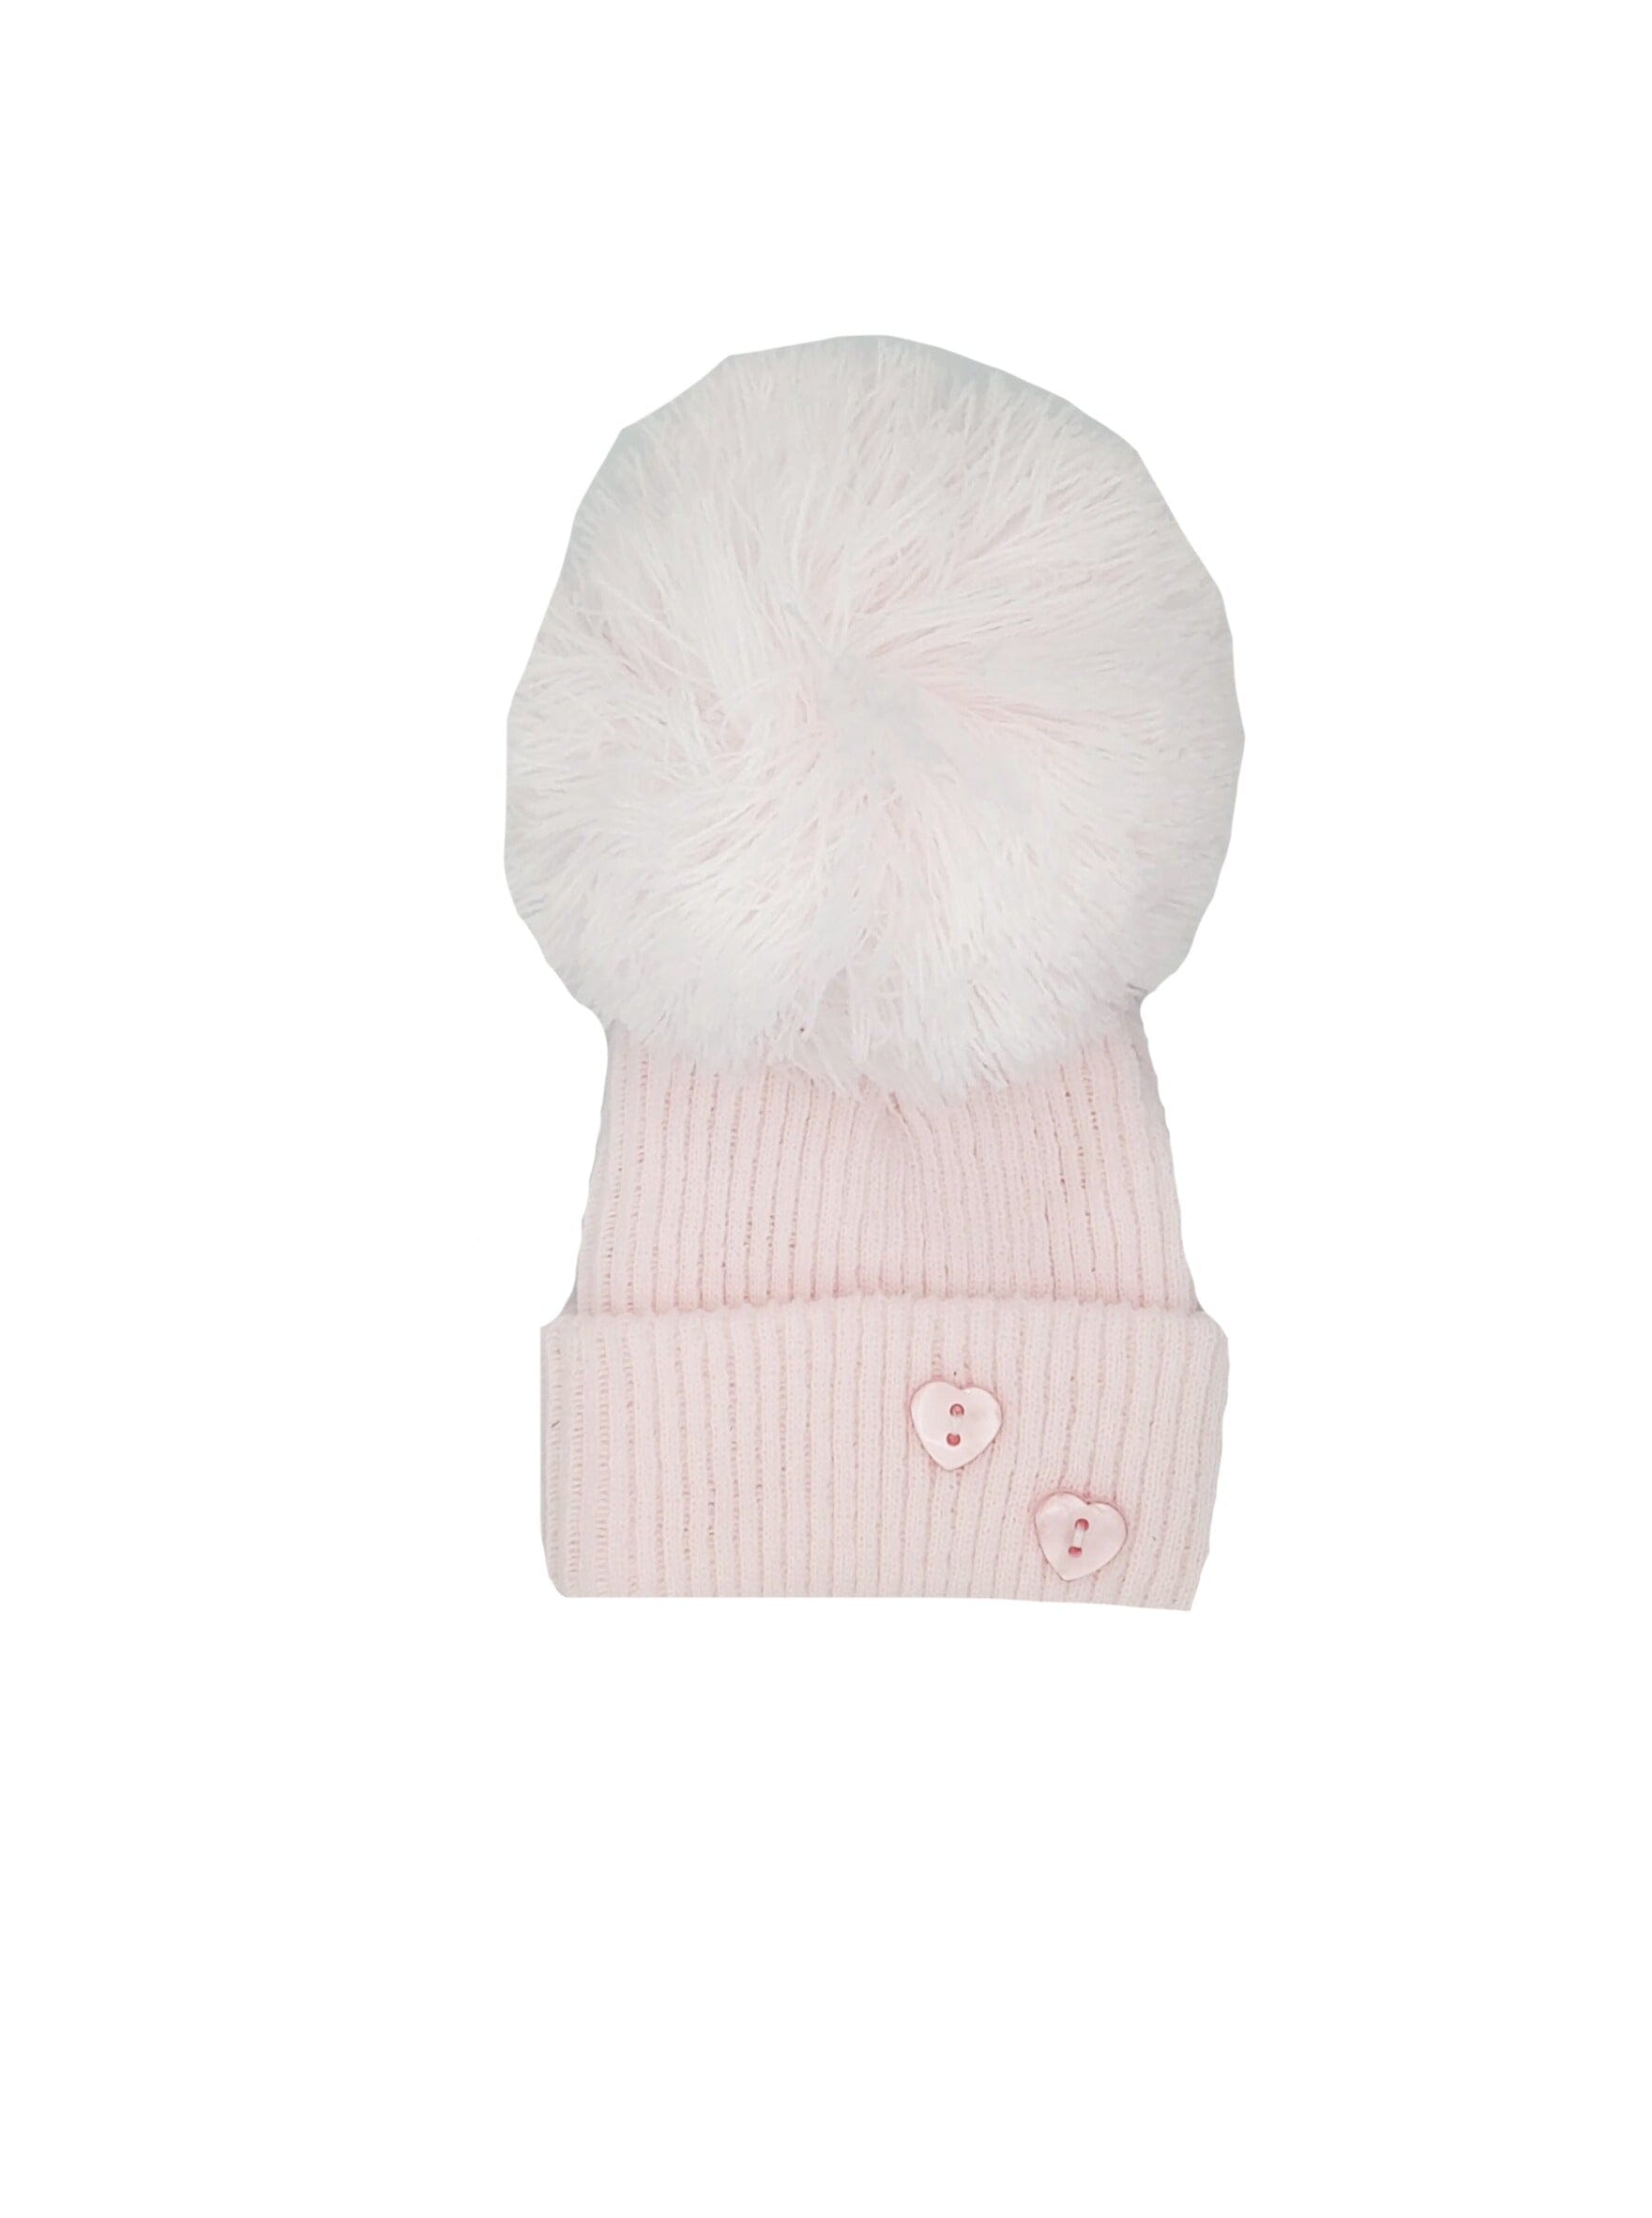 Pink Knitted Pom Pom Hat Hat Little Mouse Baby Clothing and Gifts Ltd 